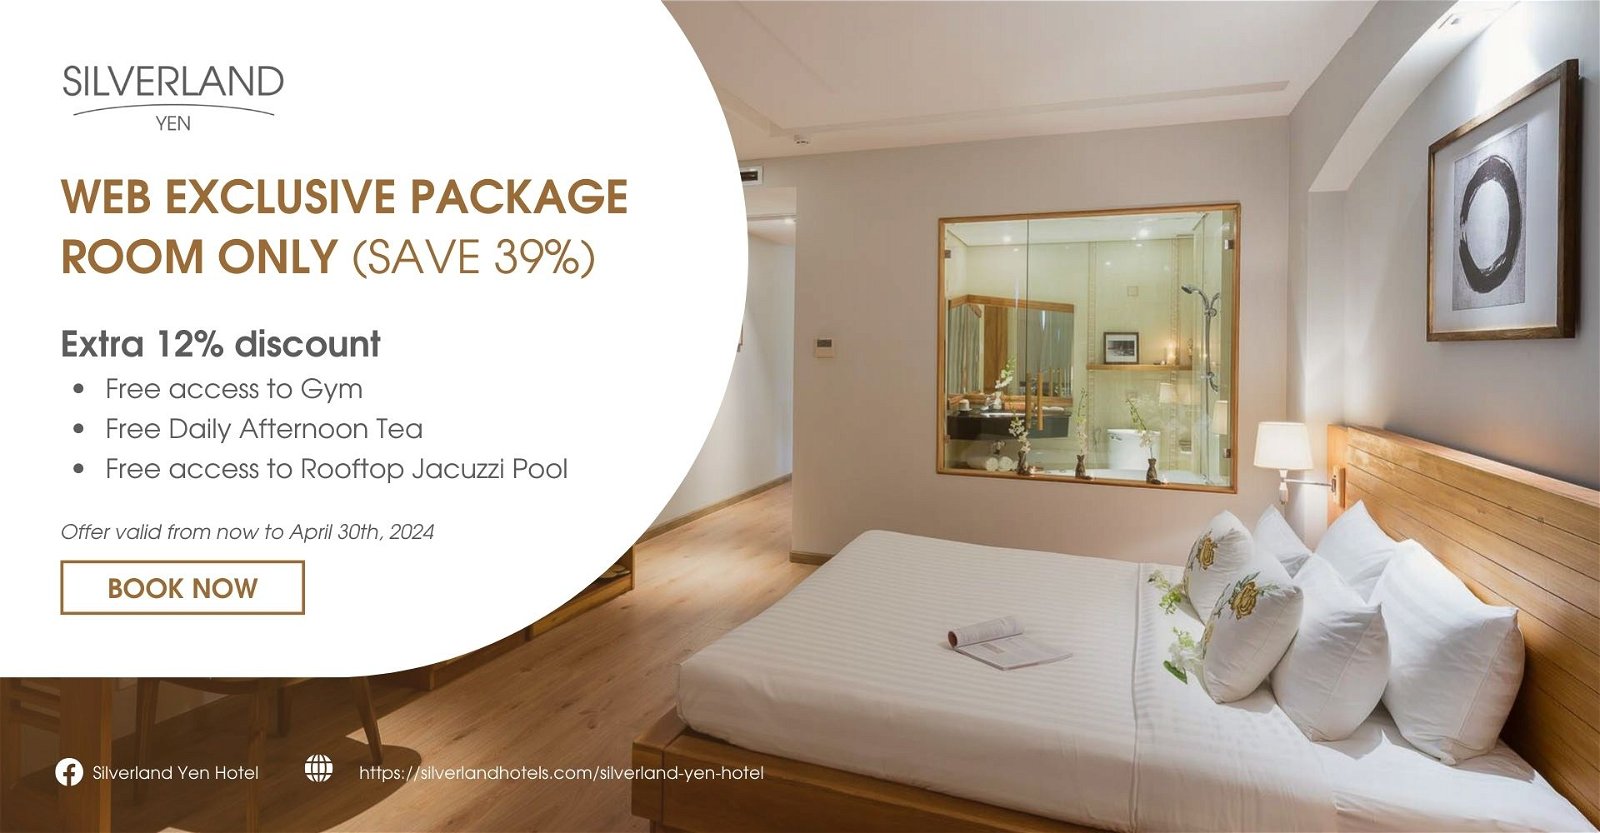 SILVERLAND YEN – WEB EXCLUSIVE – ROOM ONLY (SAVE 39%)